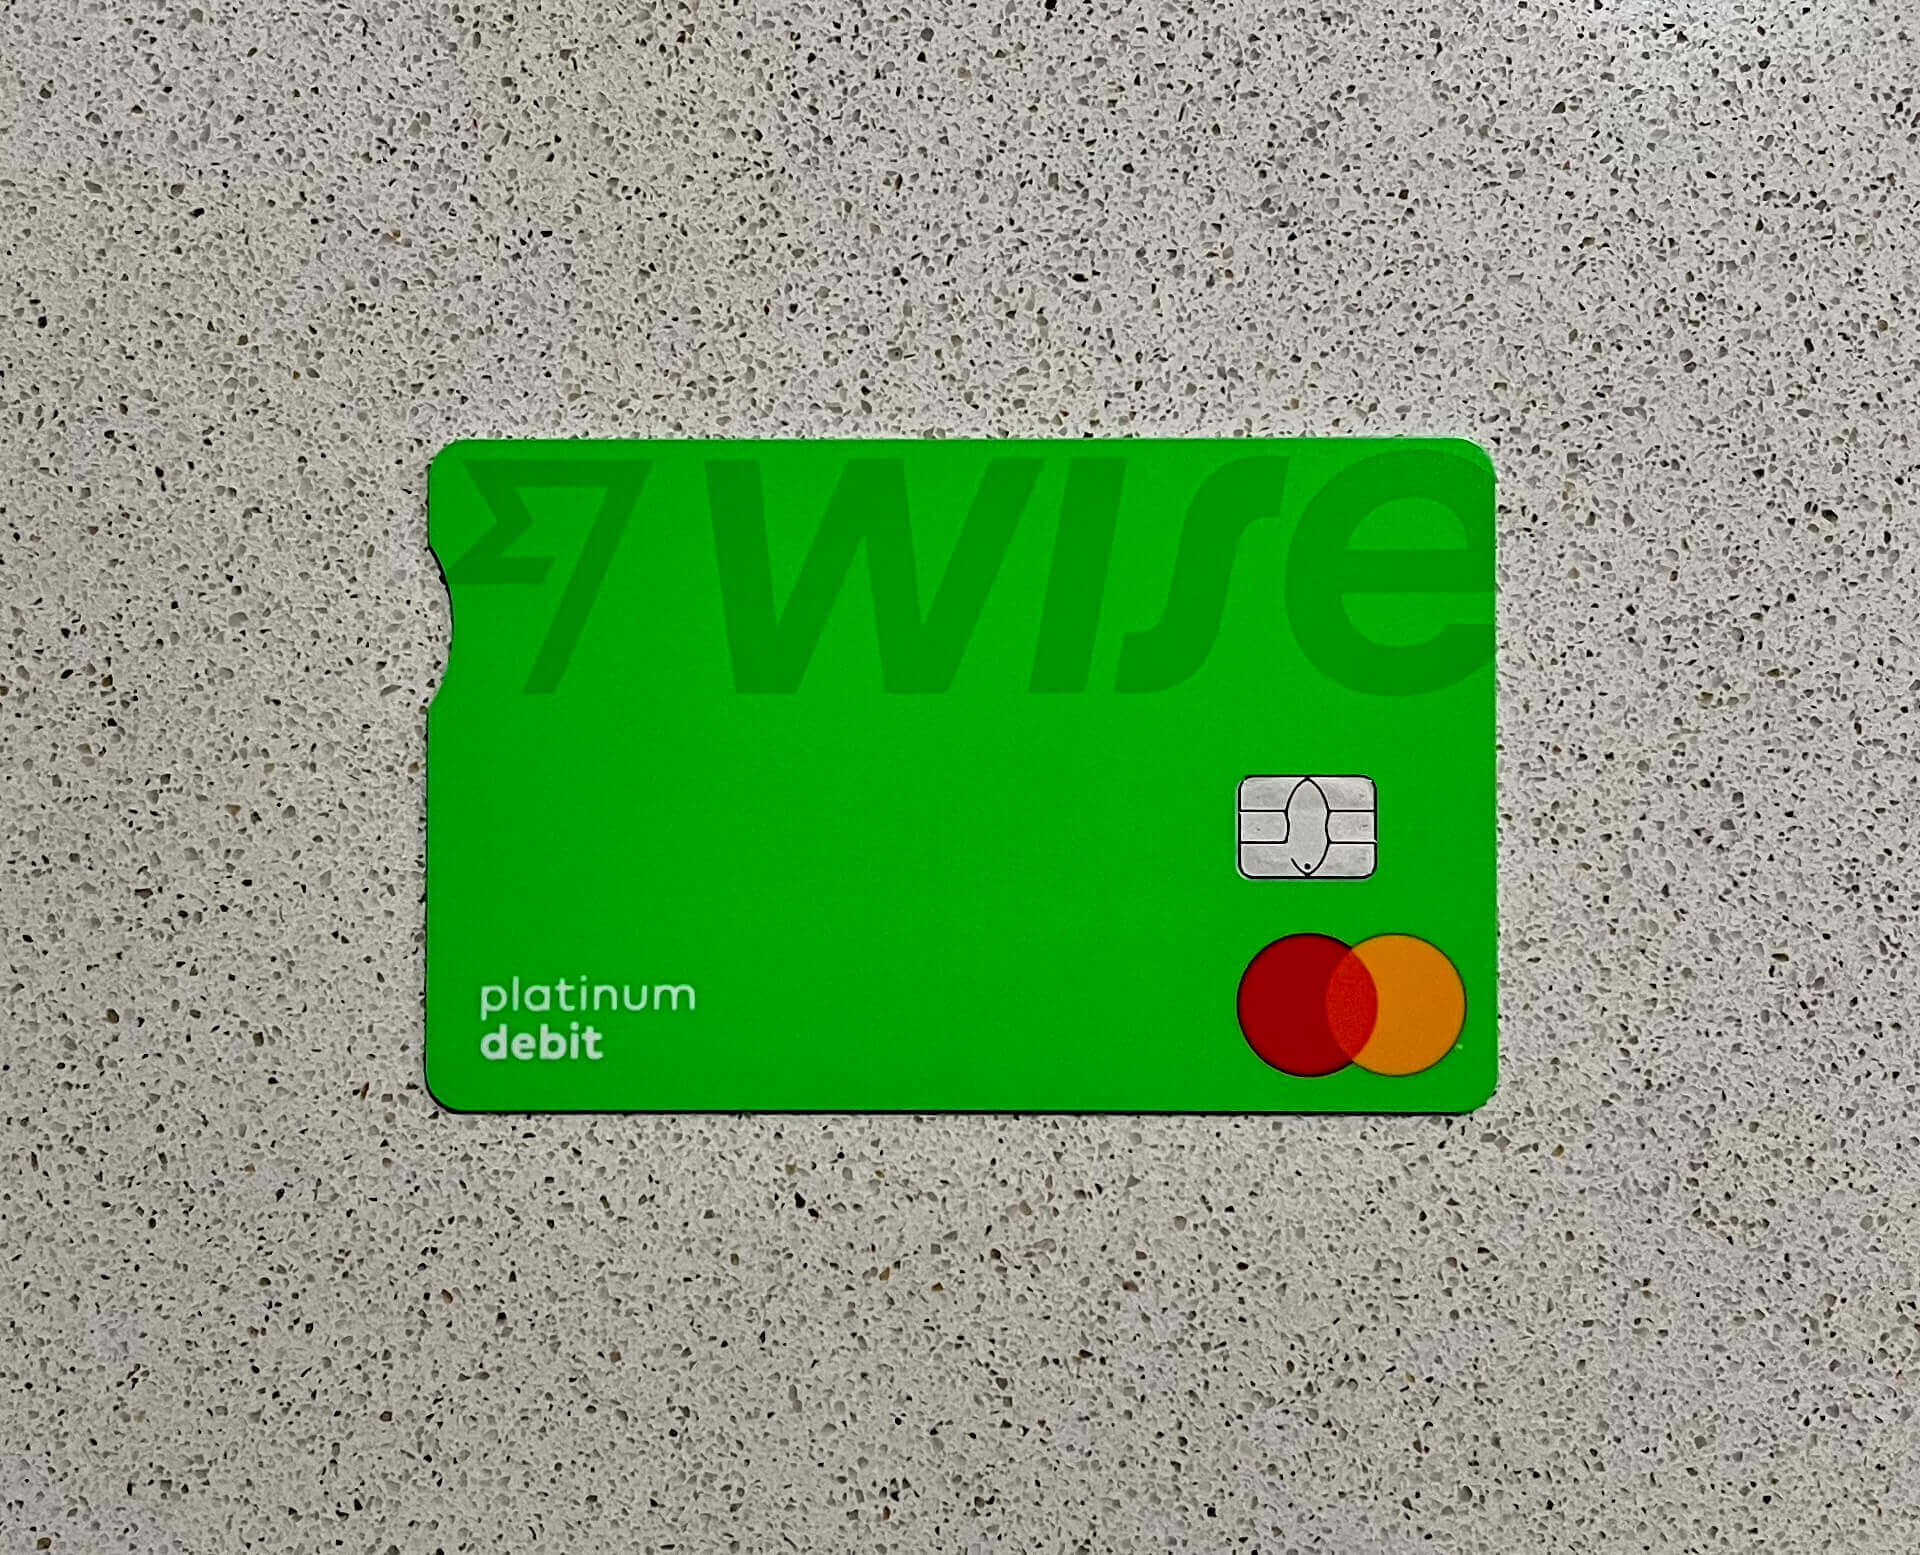 wise travel card review reddit